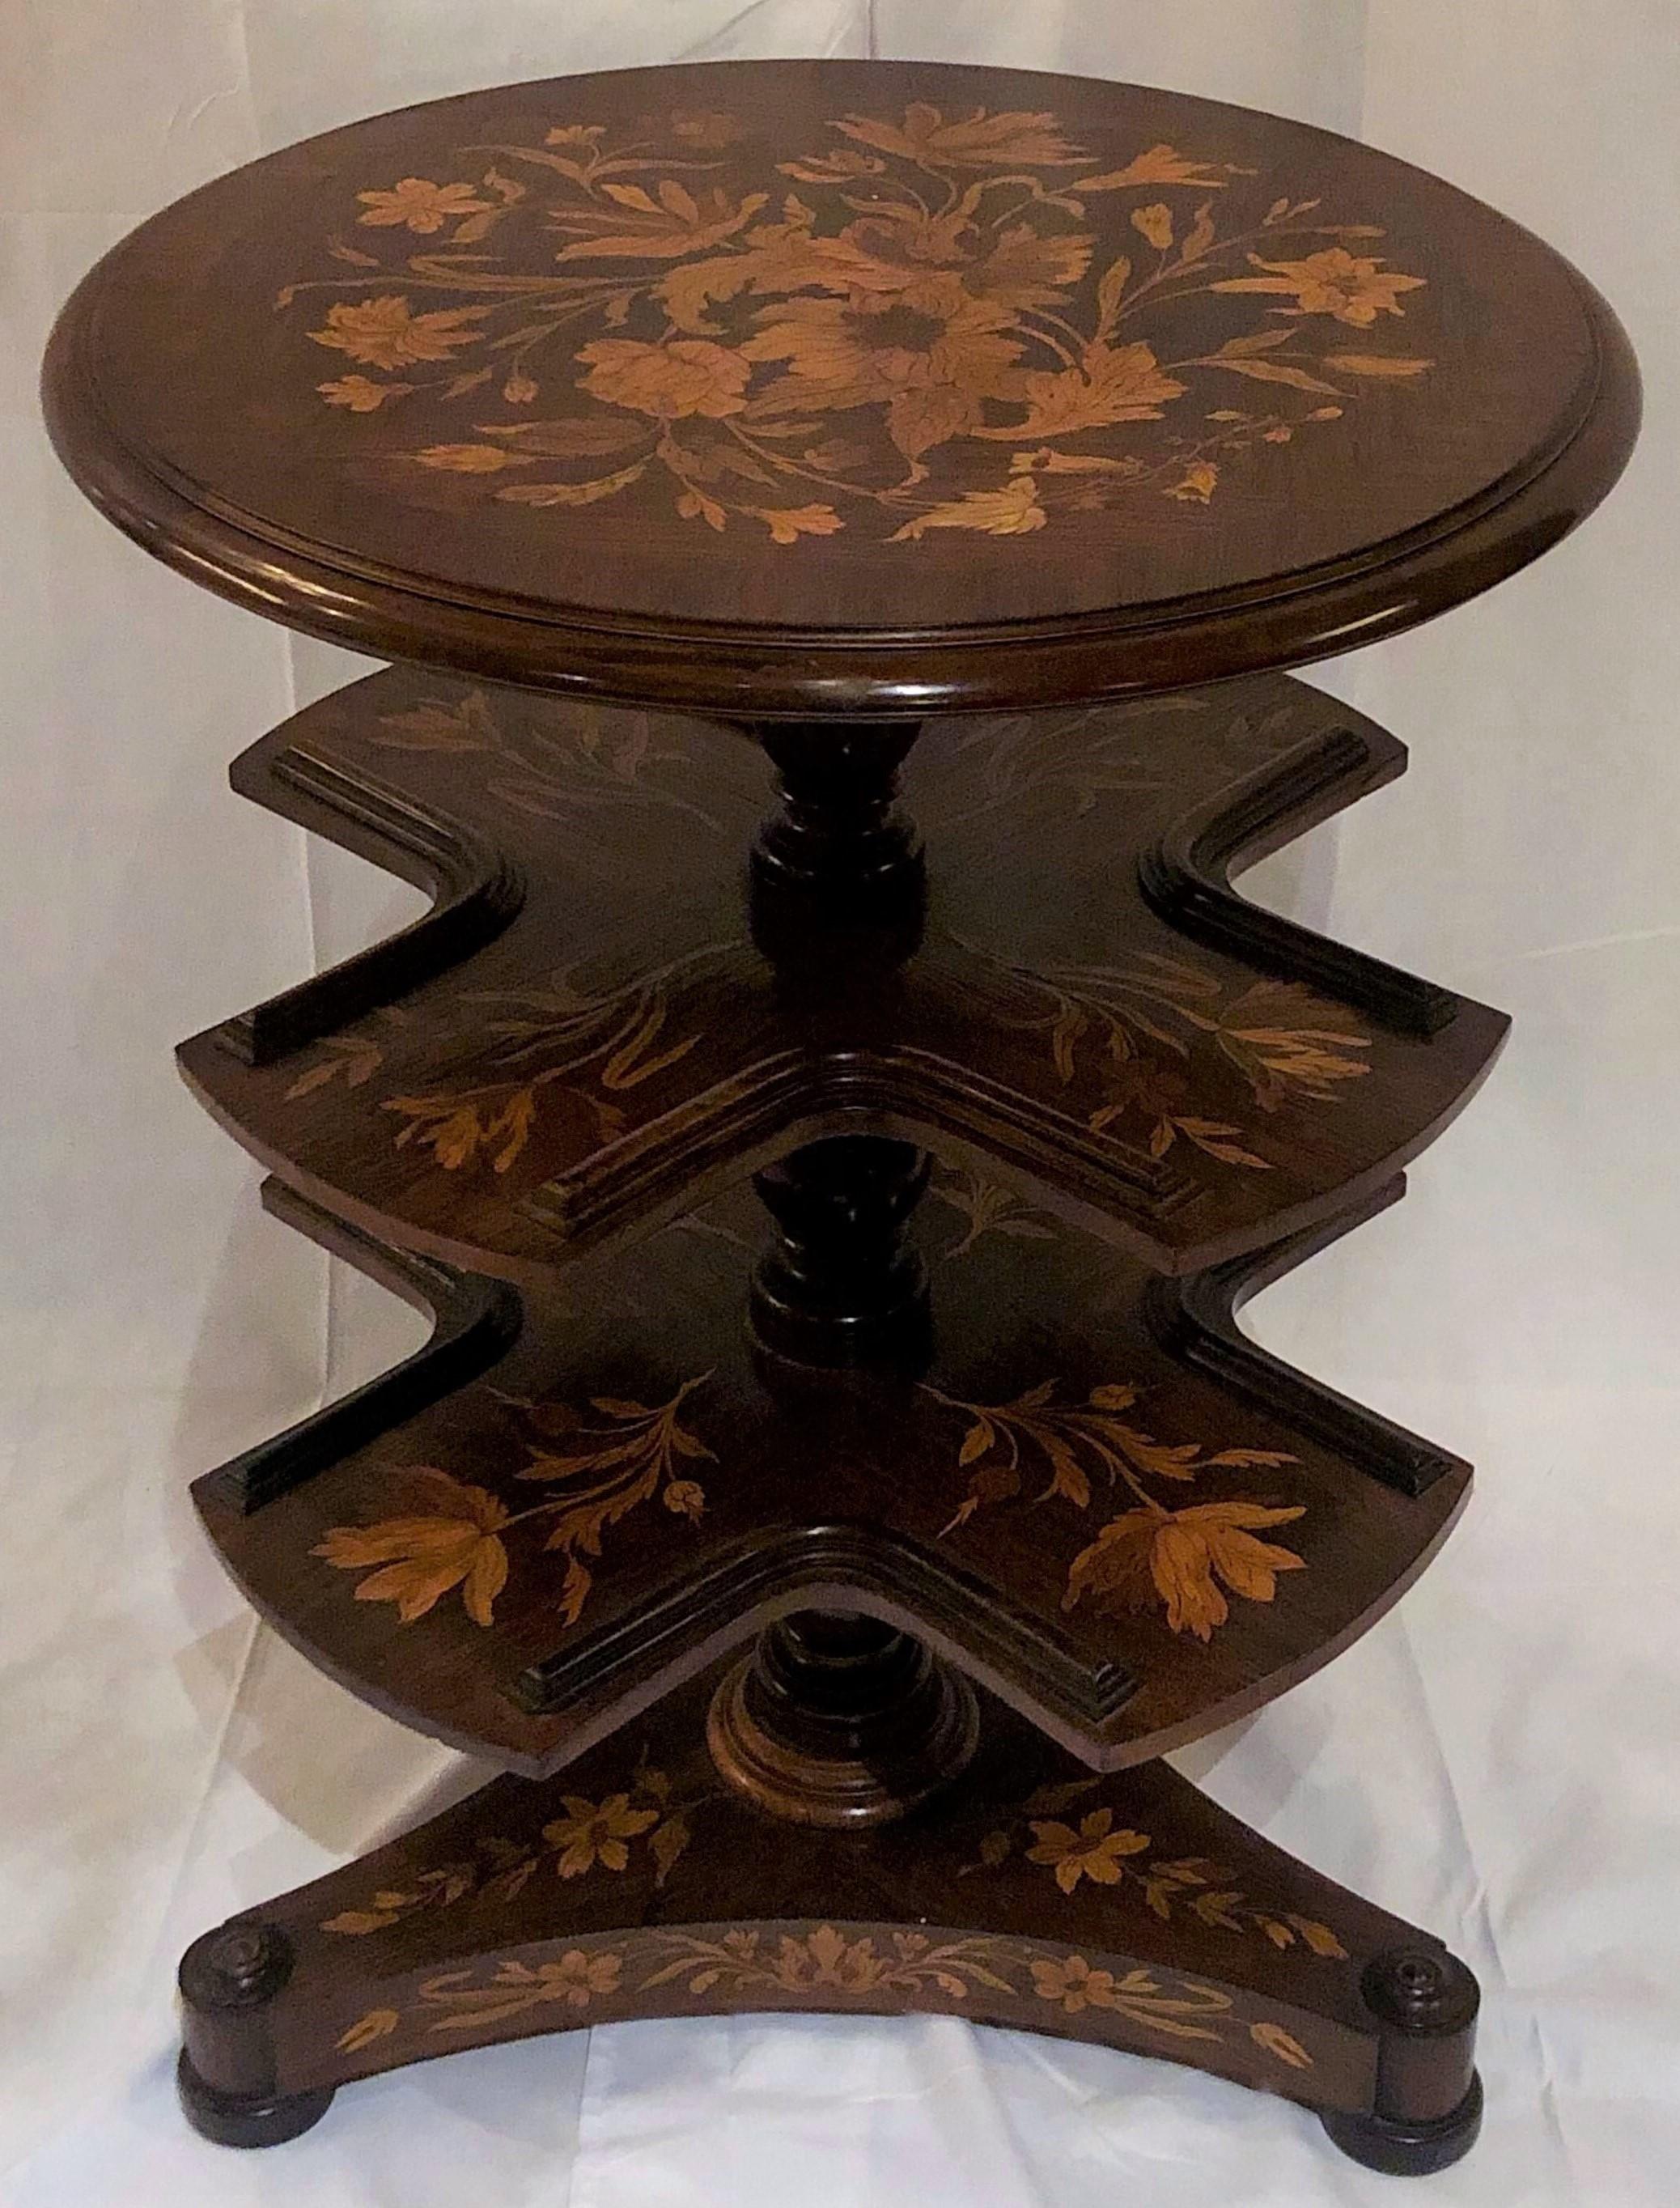 Antique 19th Century Dutch Marquetry 3 Tier Book Stand Table.